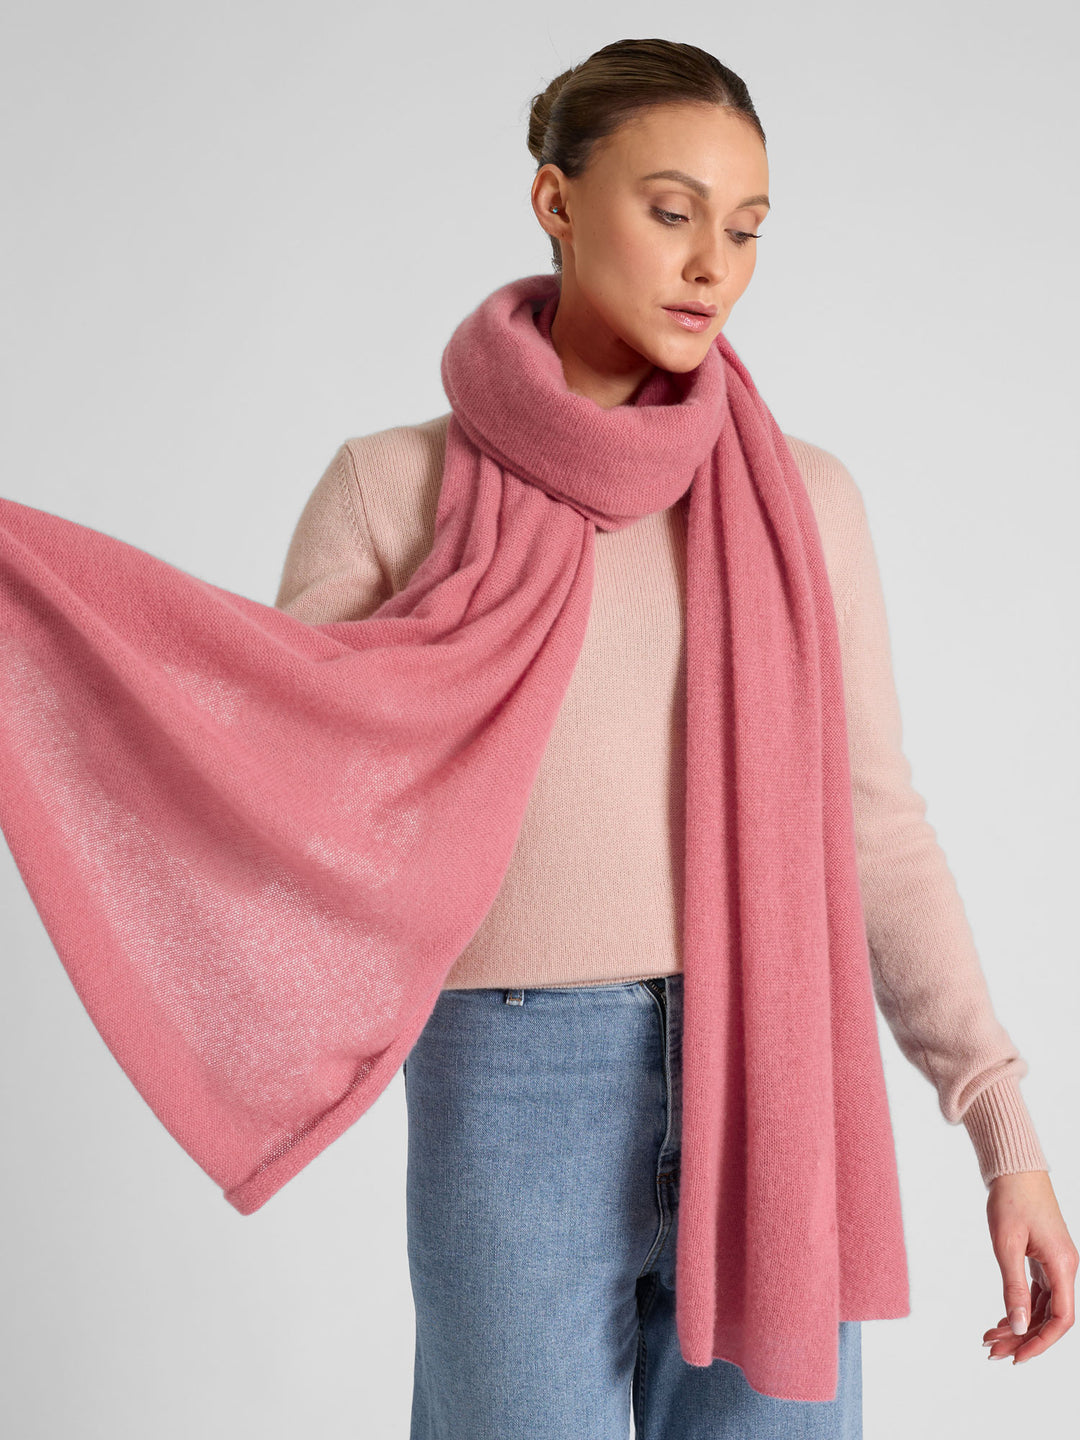 Airy cashmere scarf "Flow" - pink berry